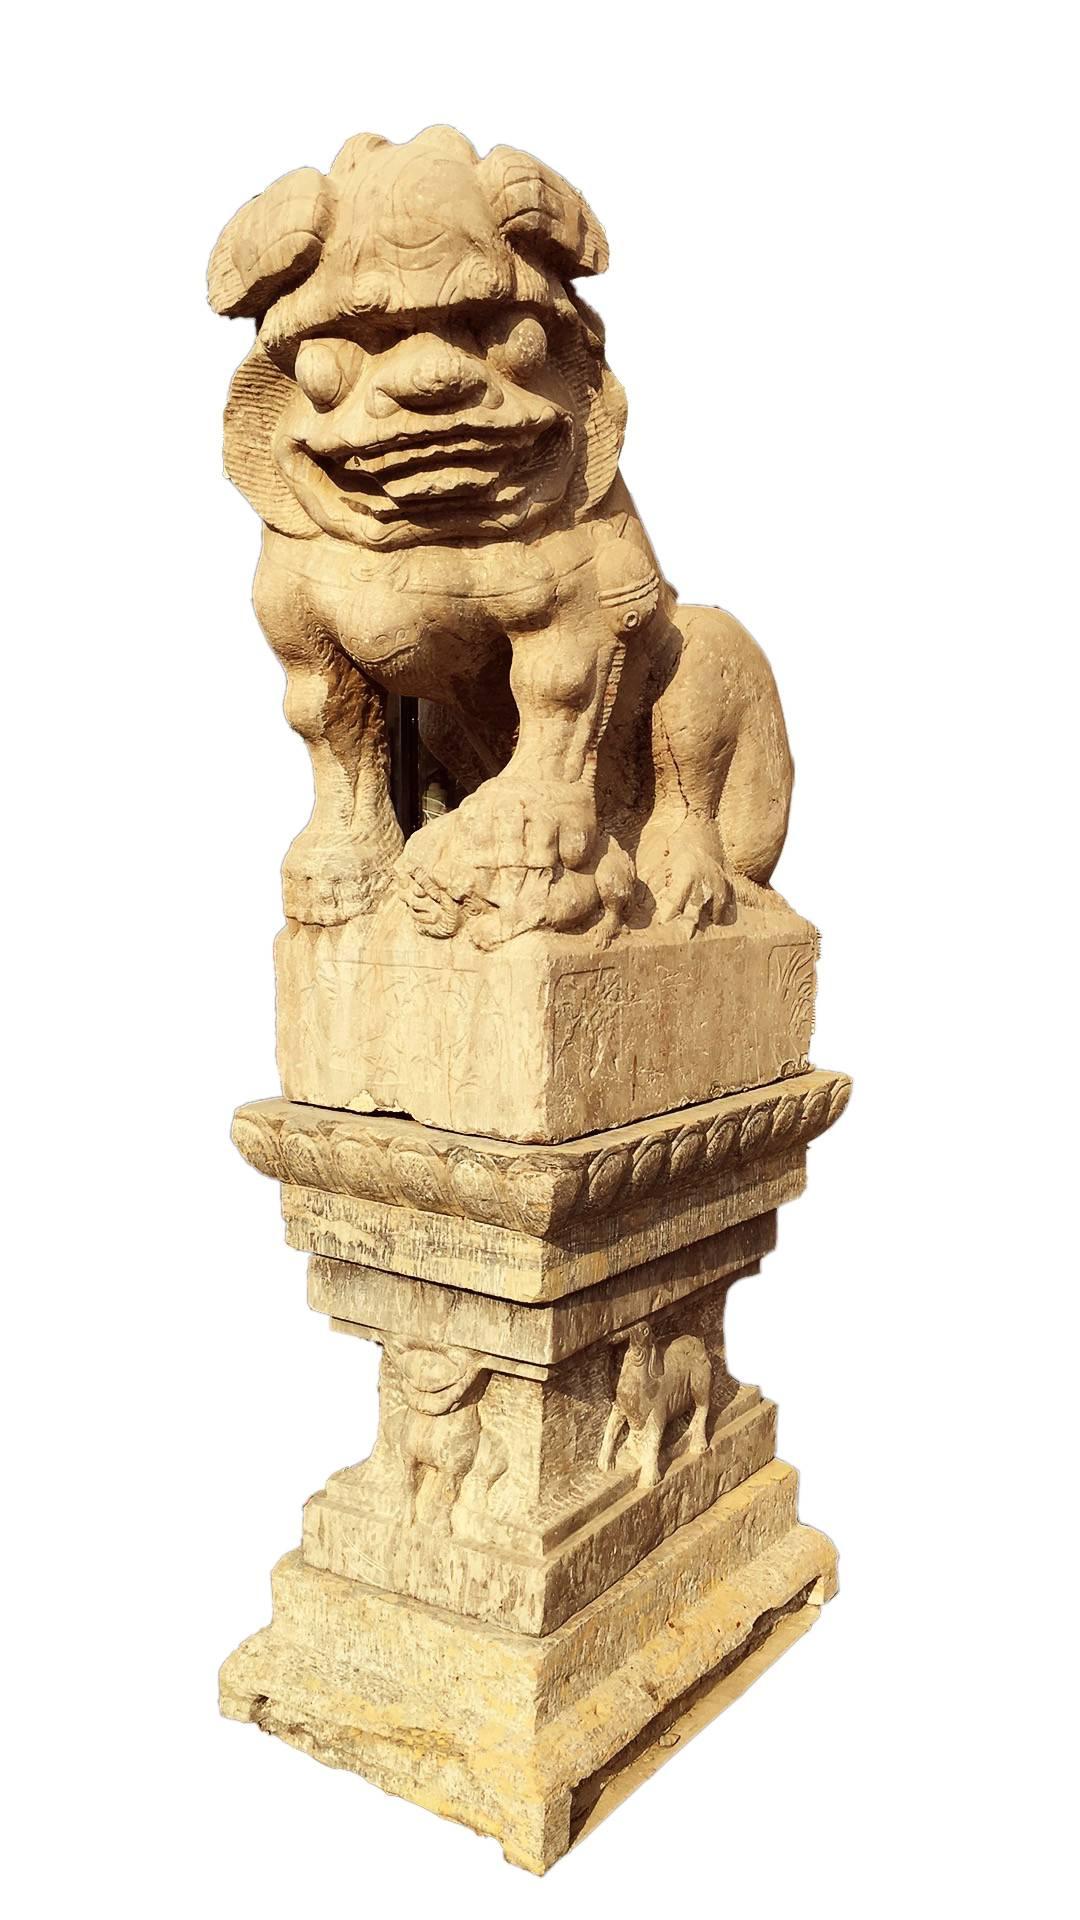 These majestic creatures are c. 1800 (Qing Dynasty). This pair of These limestone guardians are displayed on carved bases 

Together with their carved bases they stand 96” tall. The dimensions for the lions are 19” x 31” x 48”. The bases measure 22”